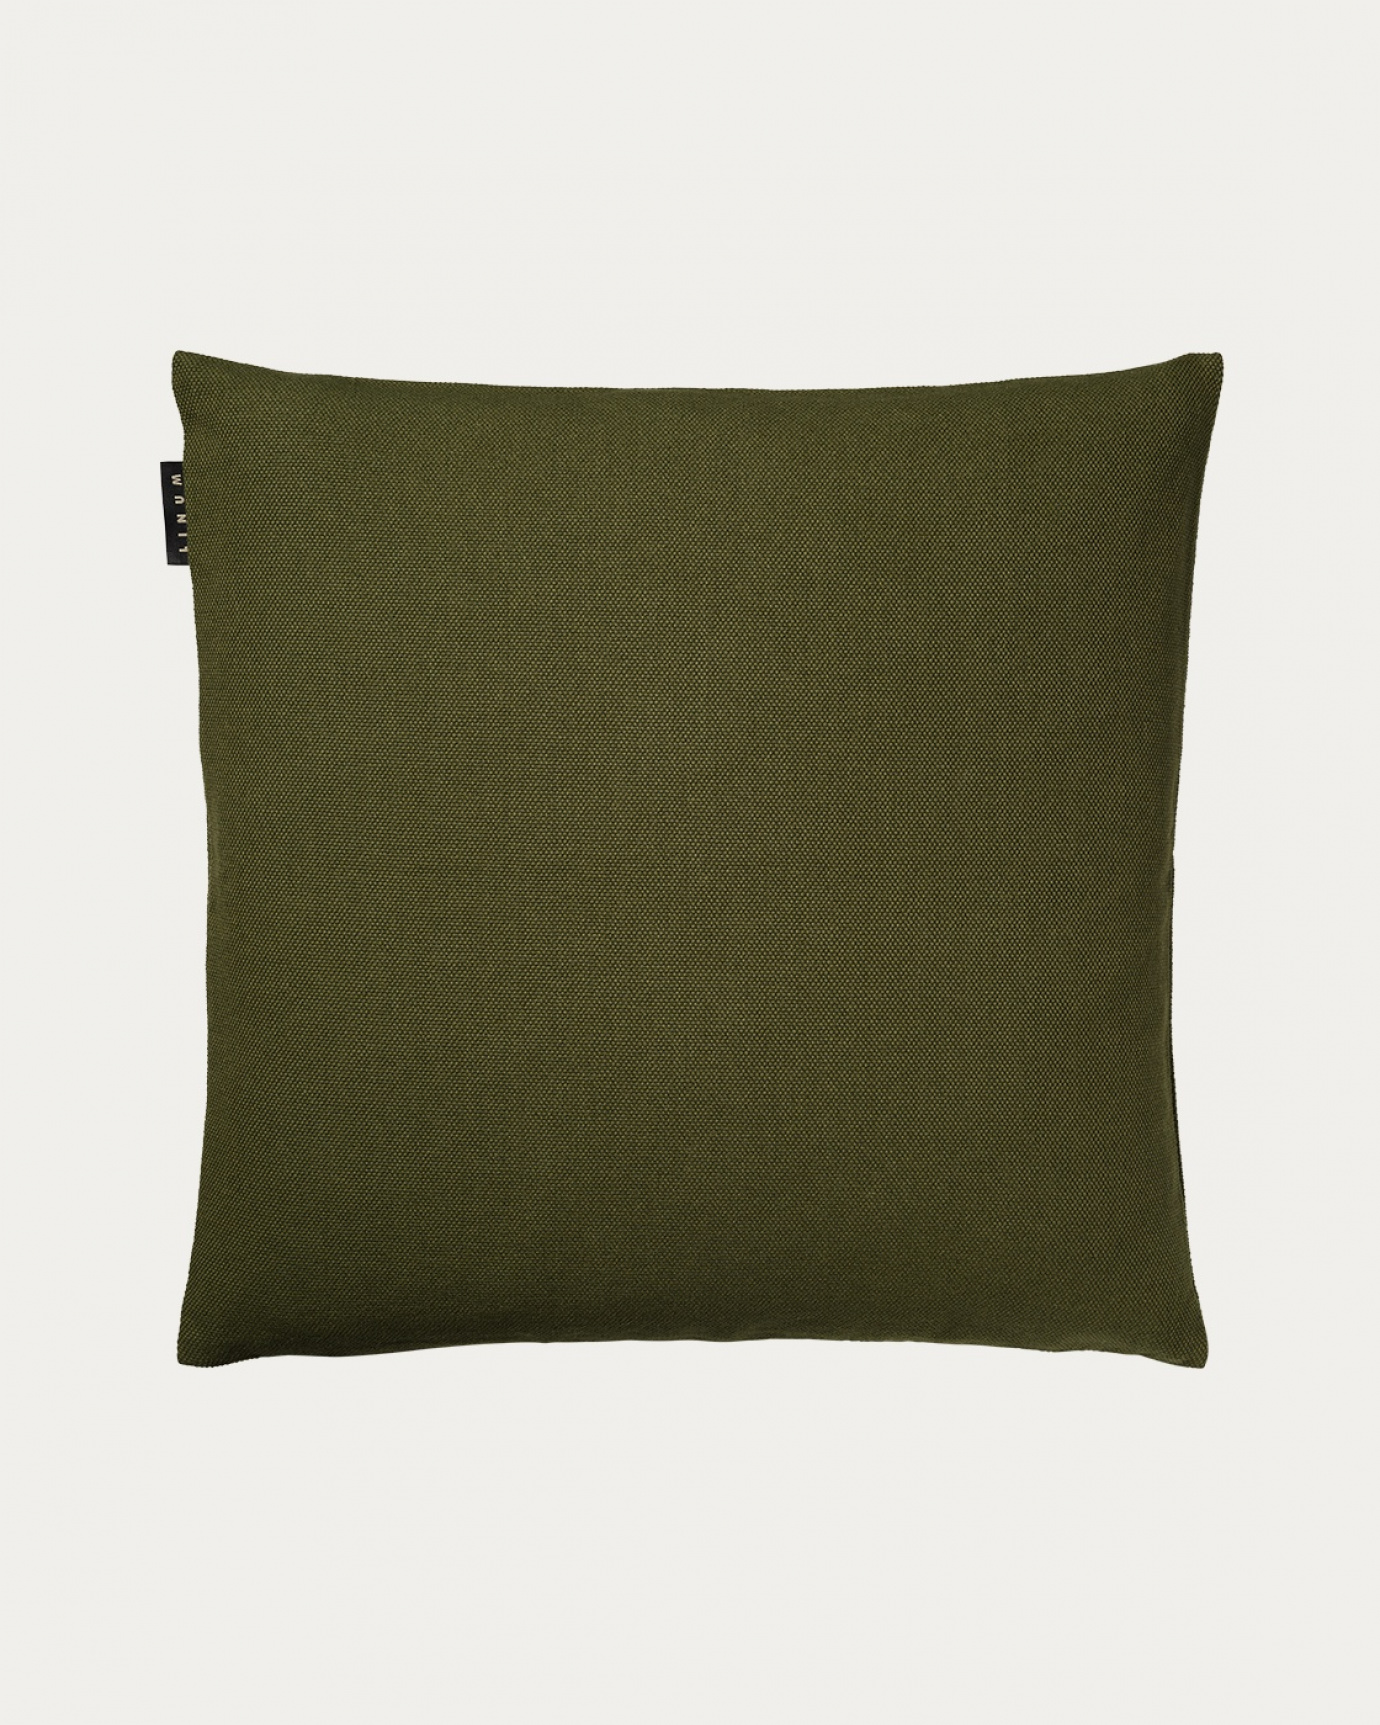 Product image dark olive green PEPPER cushion cover made of soft cotton from LINUM DESIGN. Easy to wash and durable for generations. Size 50x50 cm.